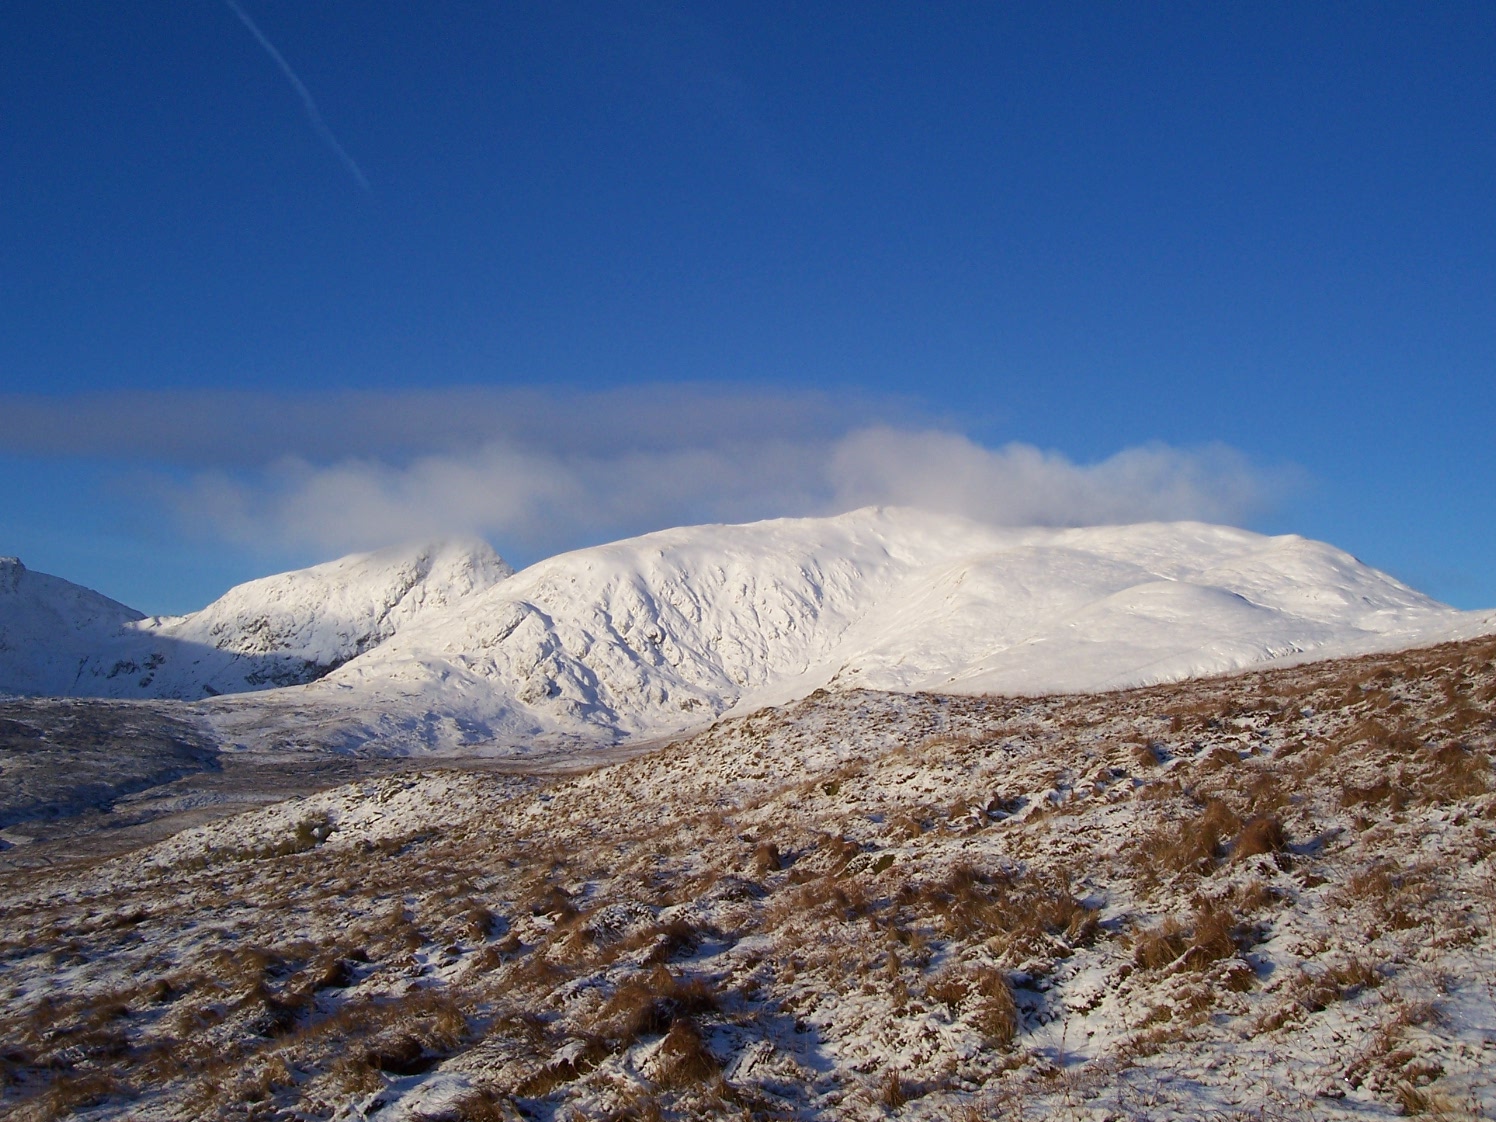 Meall Garbh (Lawers Group)